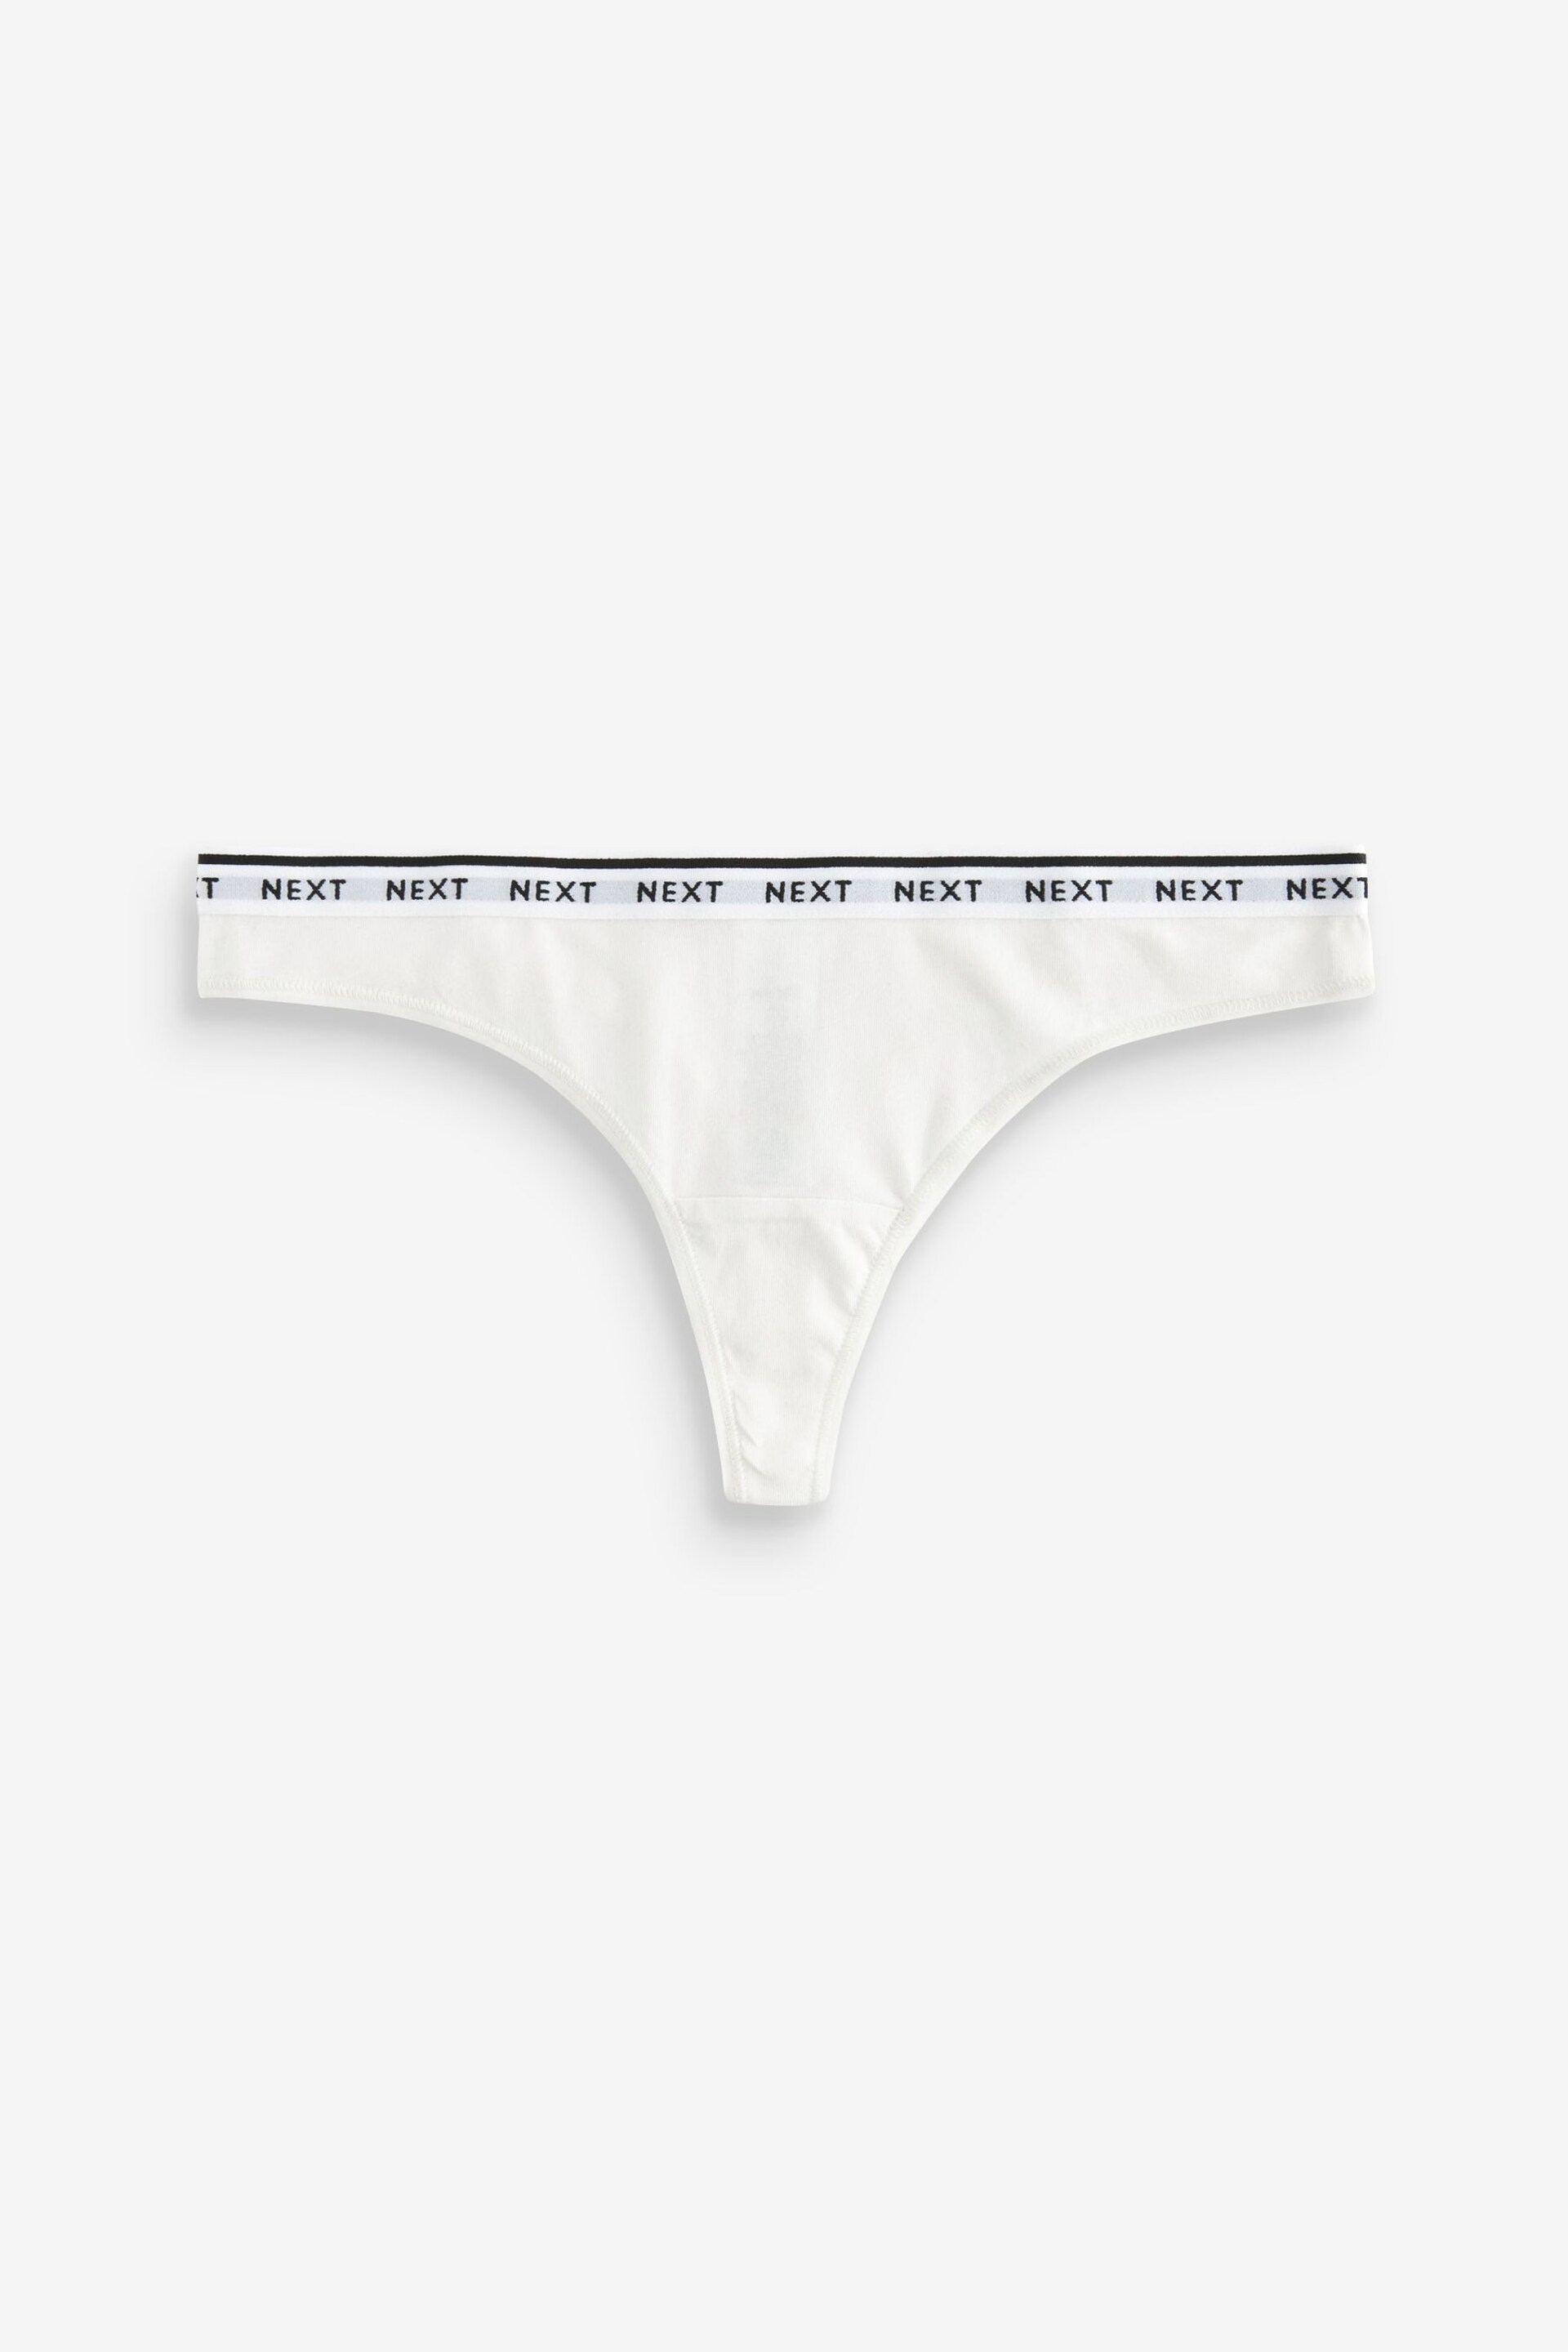 White/Black Printed Thong Cotton Rich Logo Knickers 4 Pack - Image 6 of 10